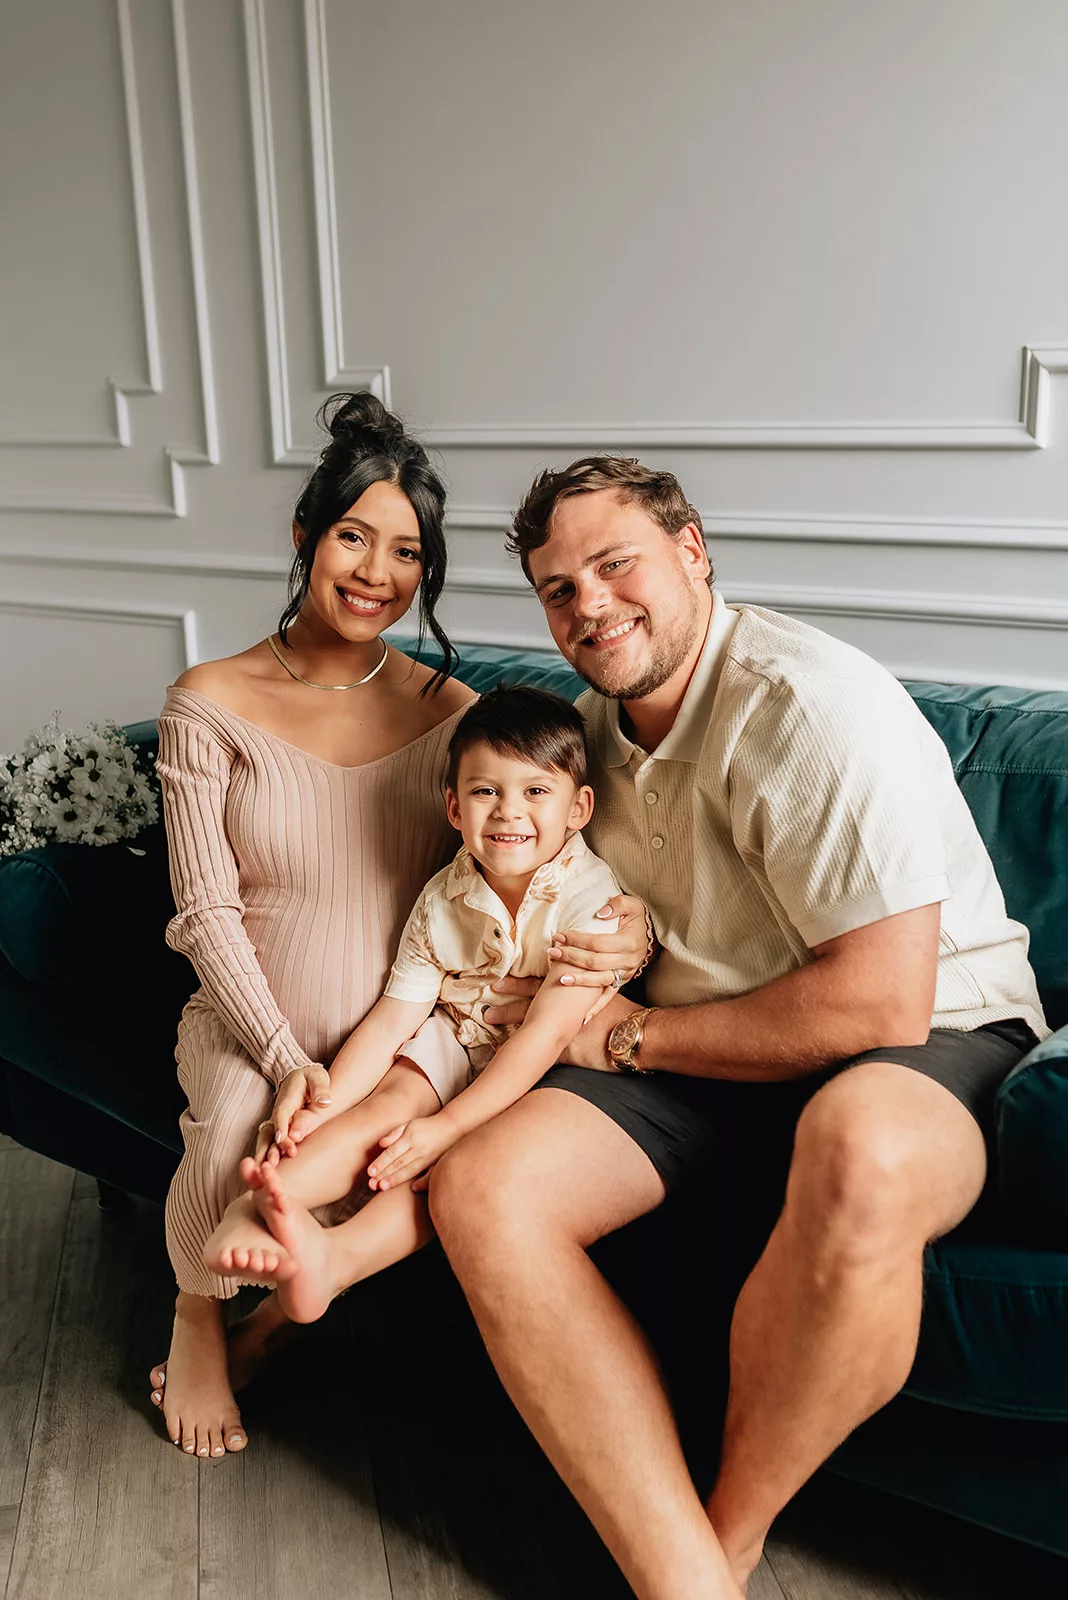 A pregnant mom and dad sit on a green couch smiling with their toddler son